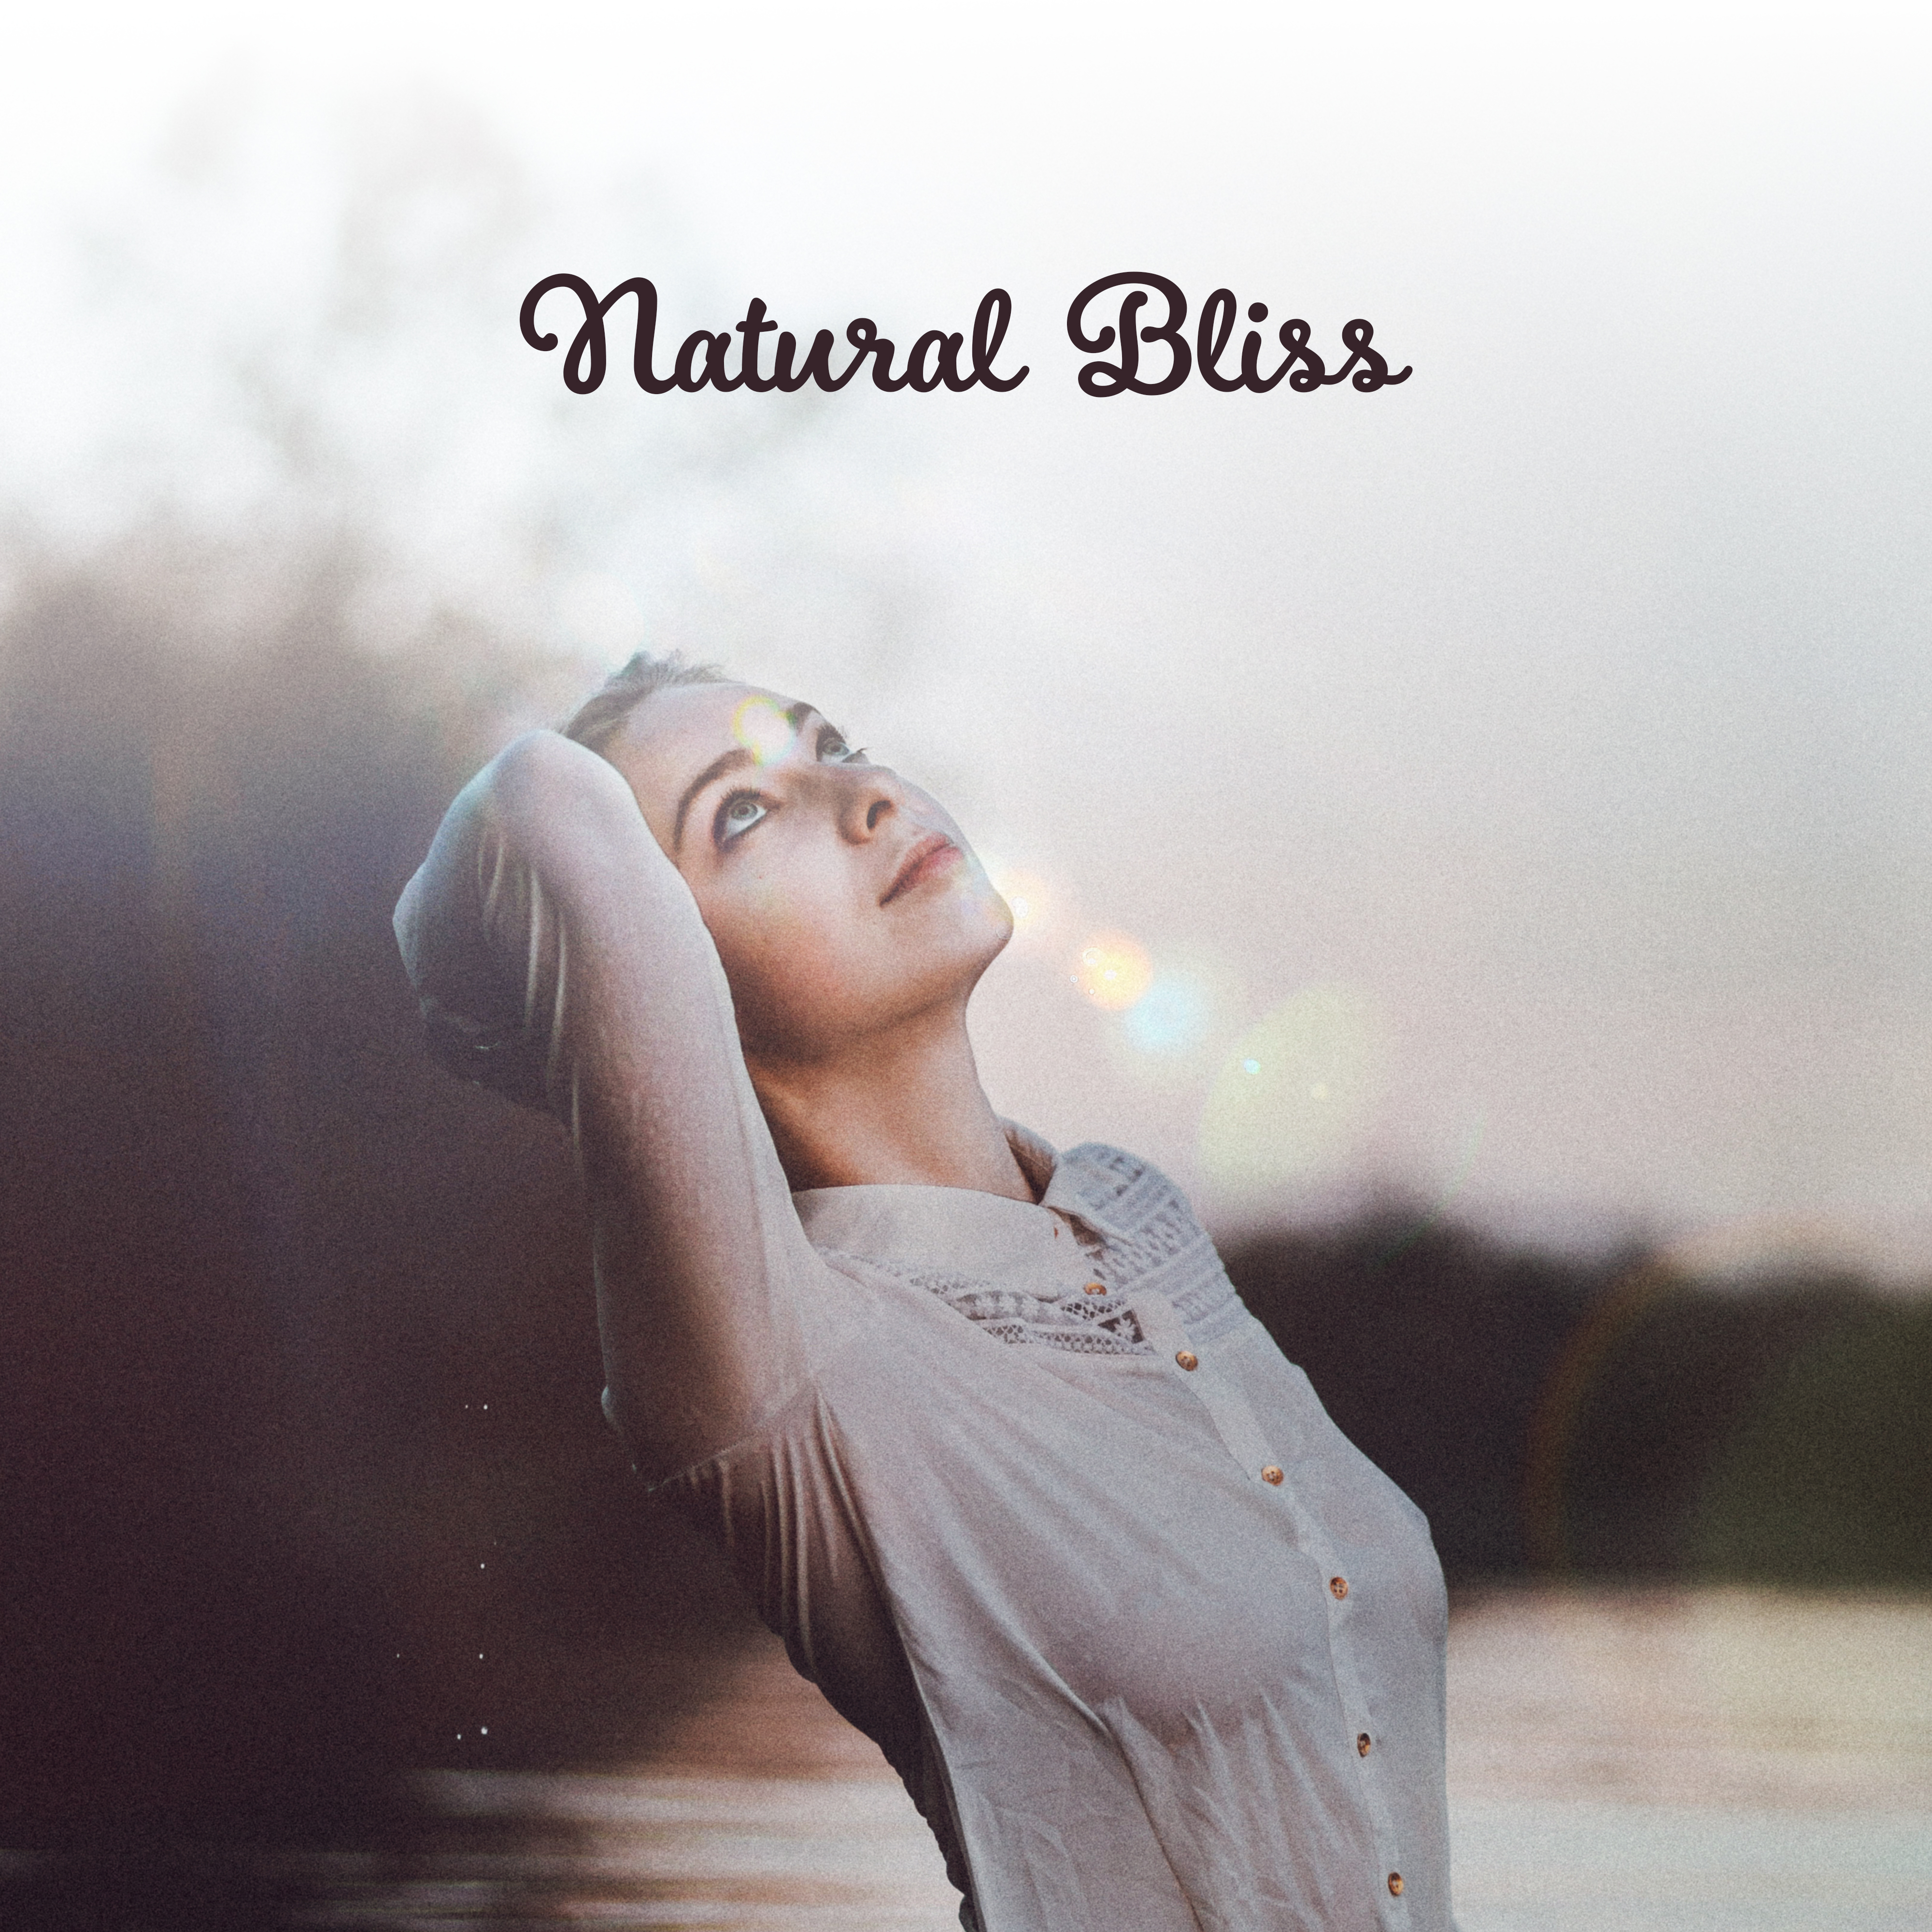 Natural Bliss – Soft New Age 2017, Music for Massage, Relaxation, Spa Treatments, Hotel Spa & Wellness, Background Music